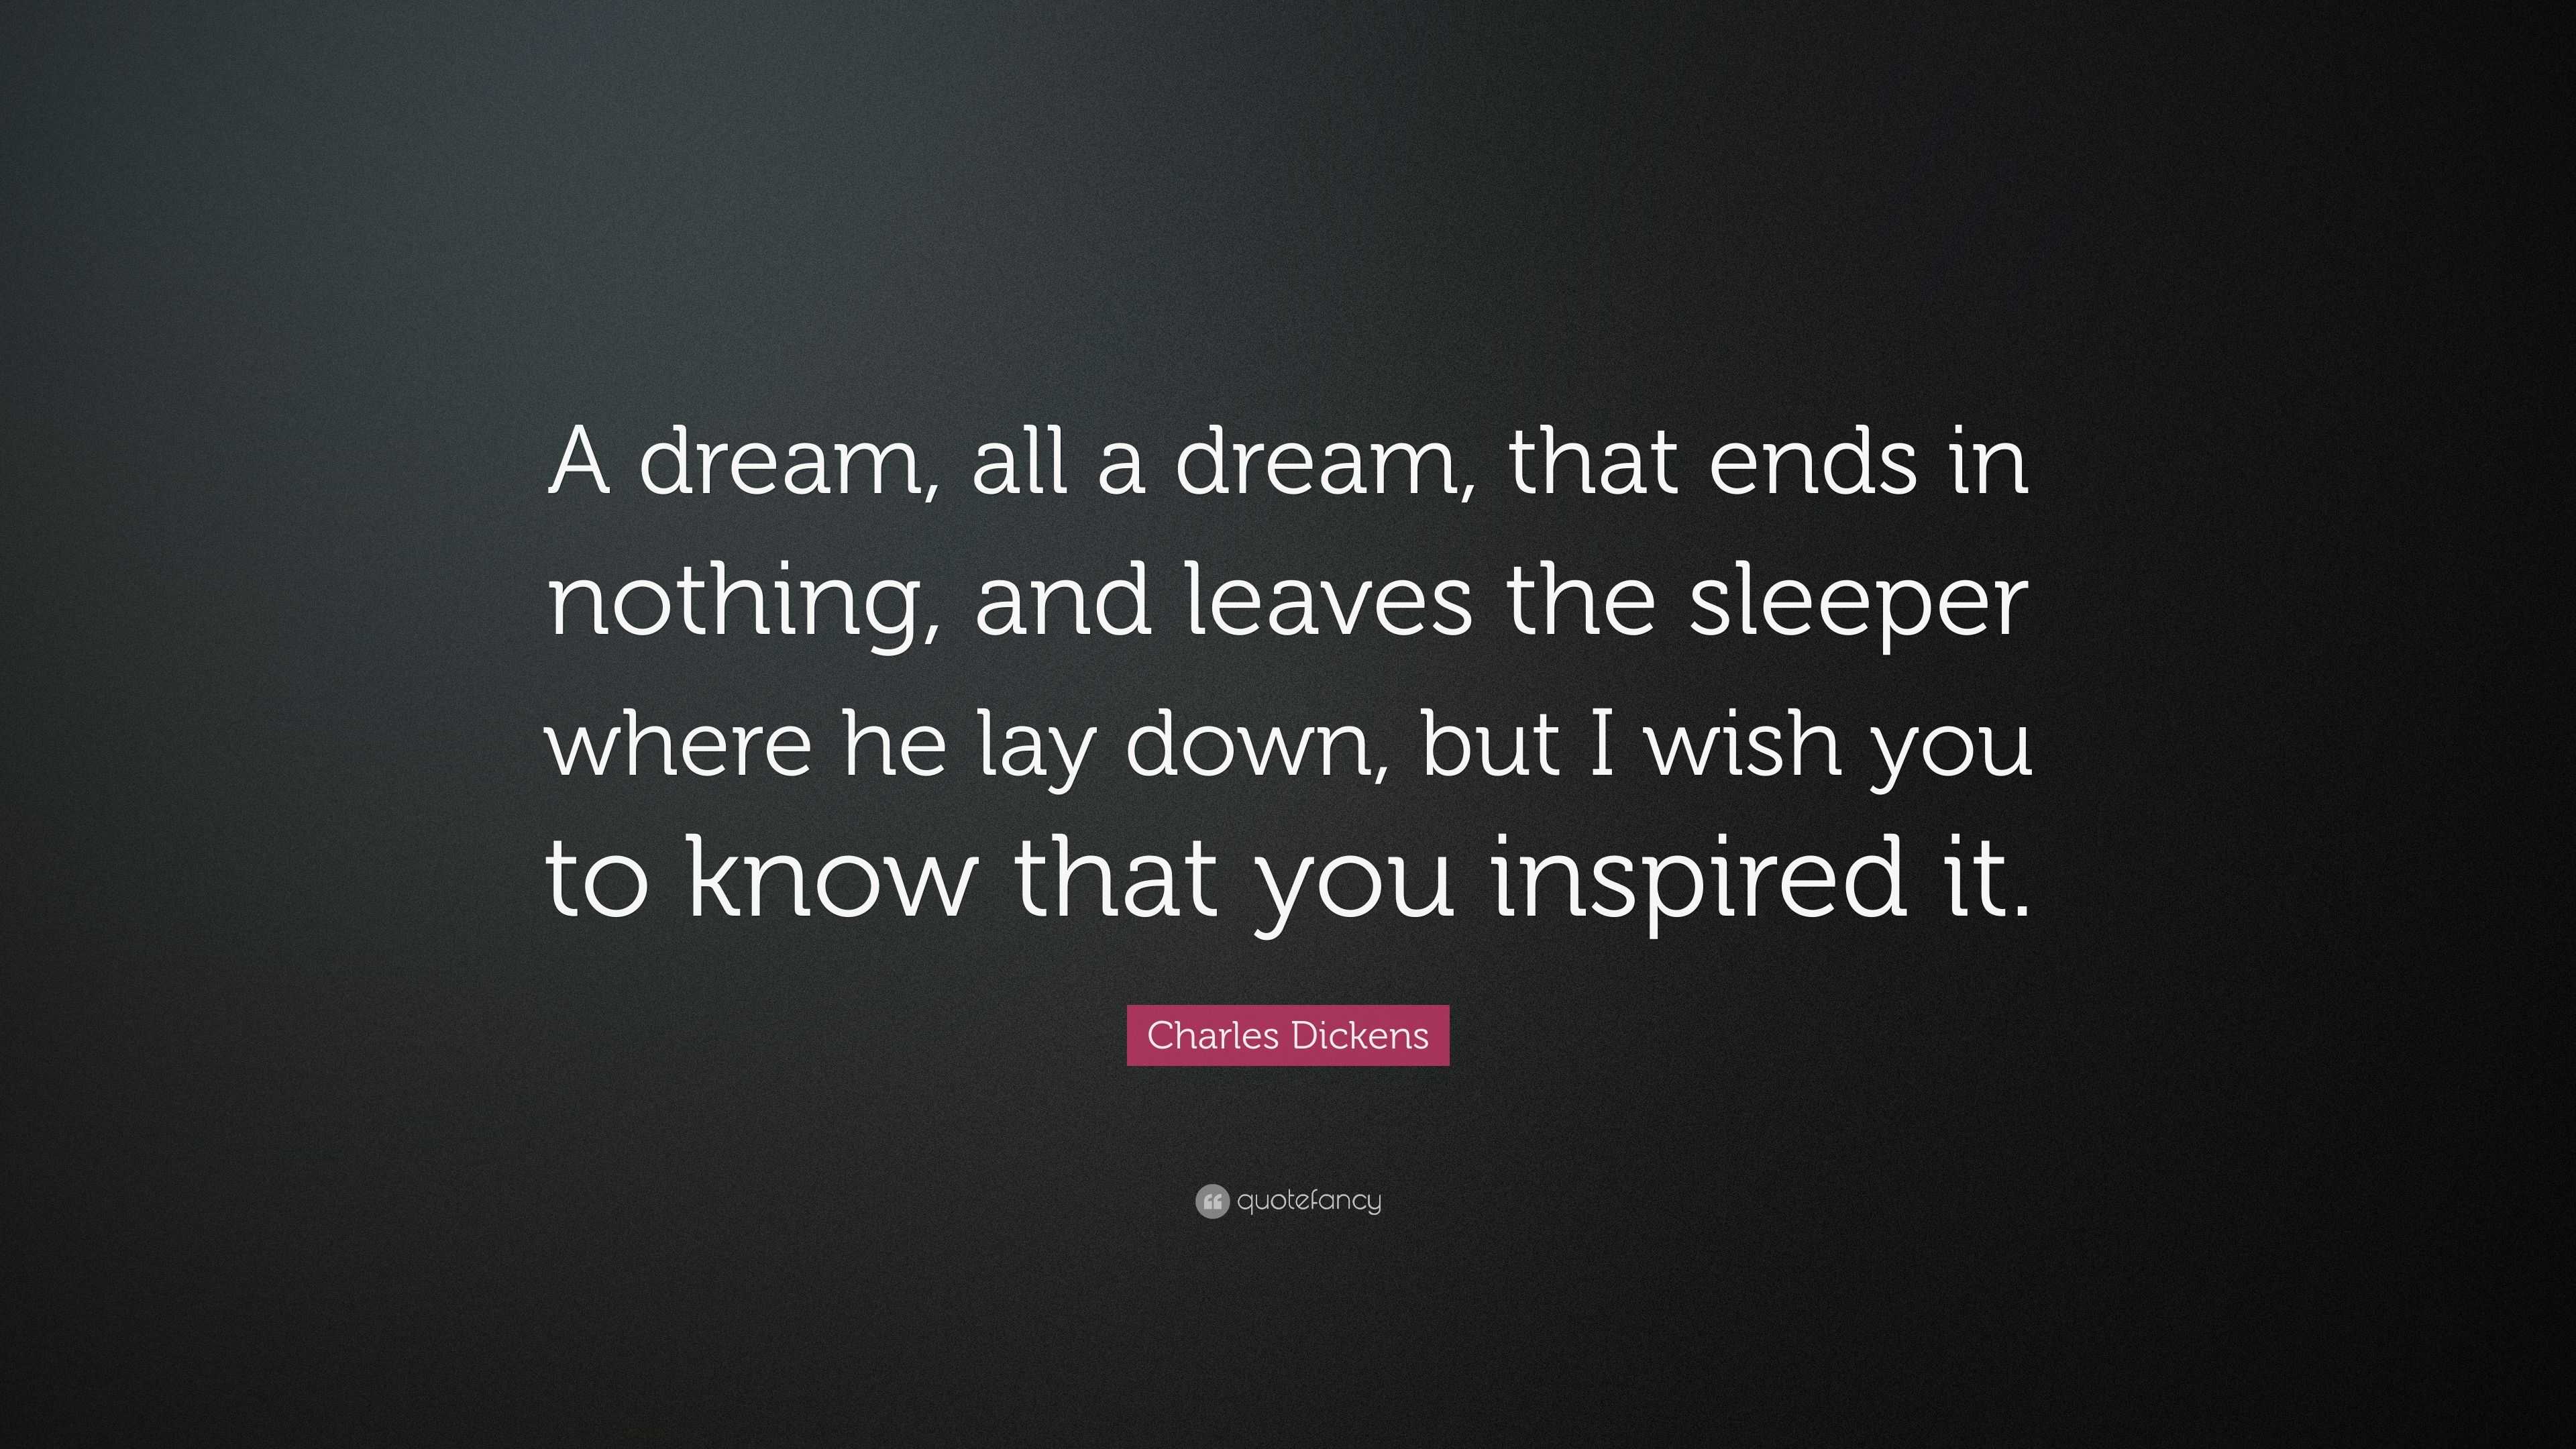 Charles Dickens Quote: “A dream, all a dream, that ends in nothing, and